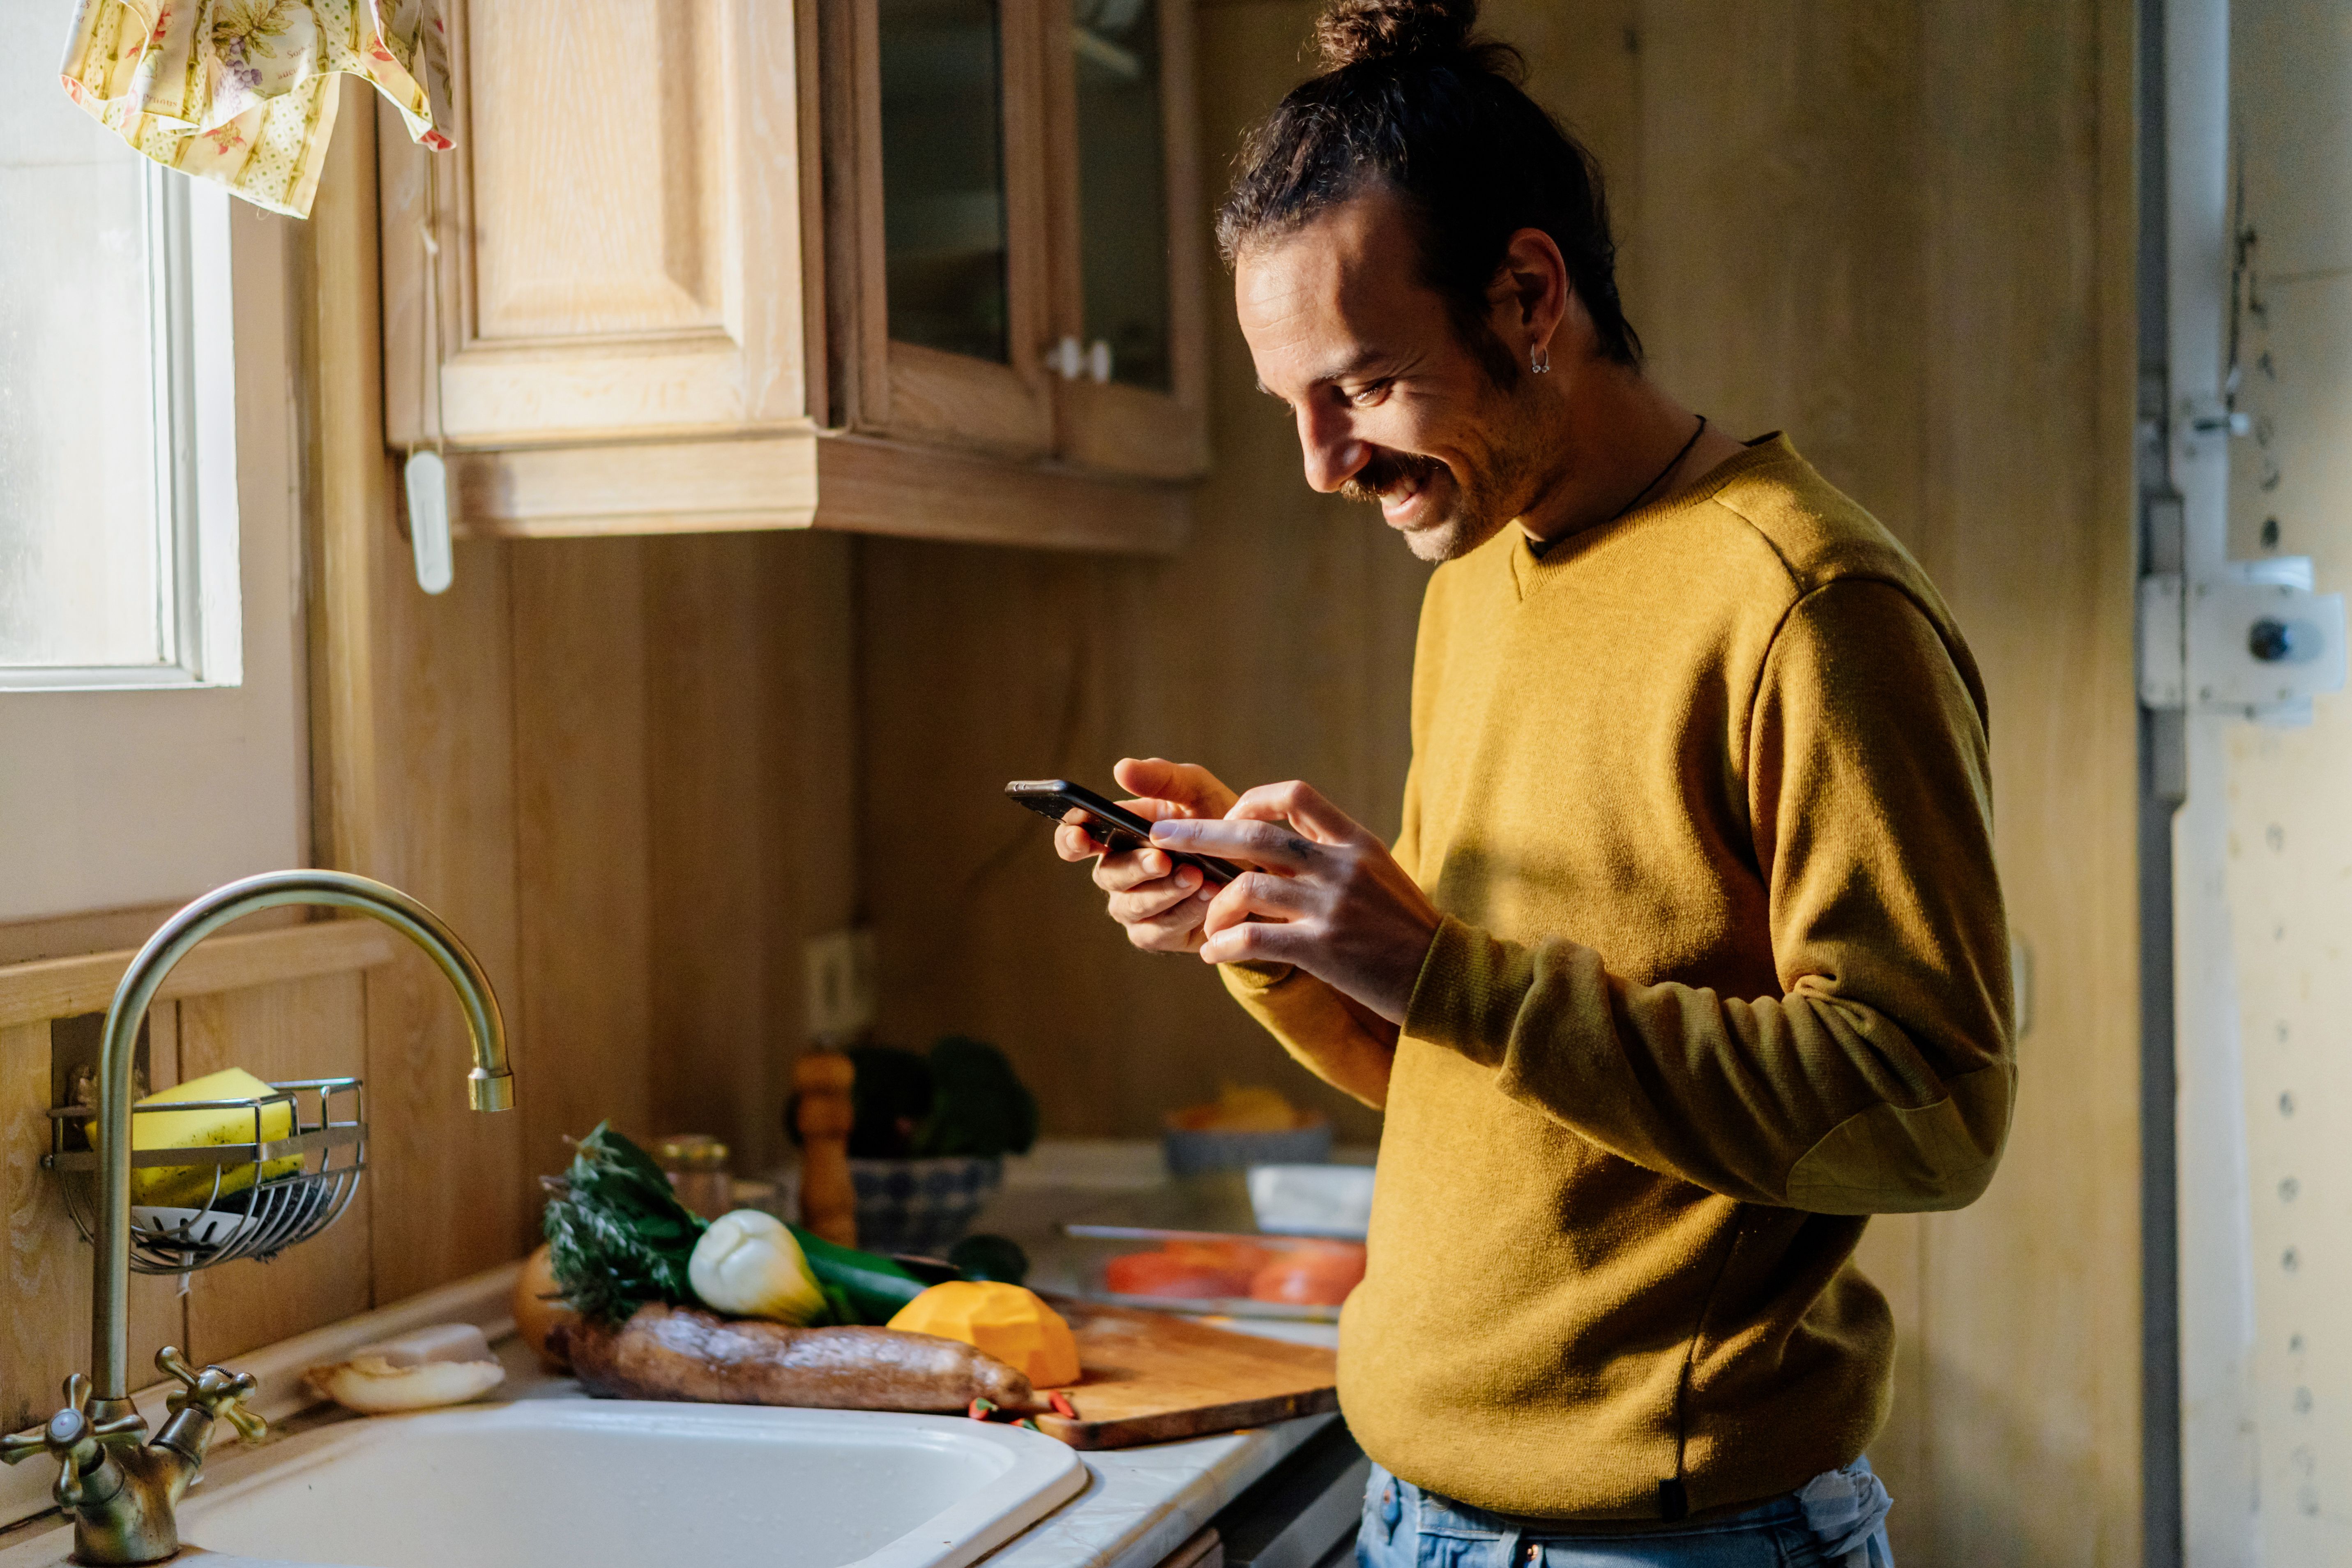 Man standing in kitchen, smiling at his phone